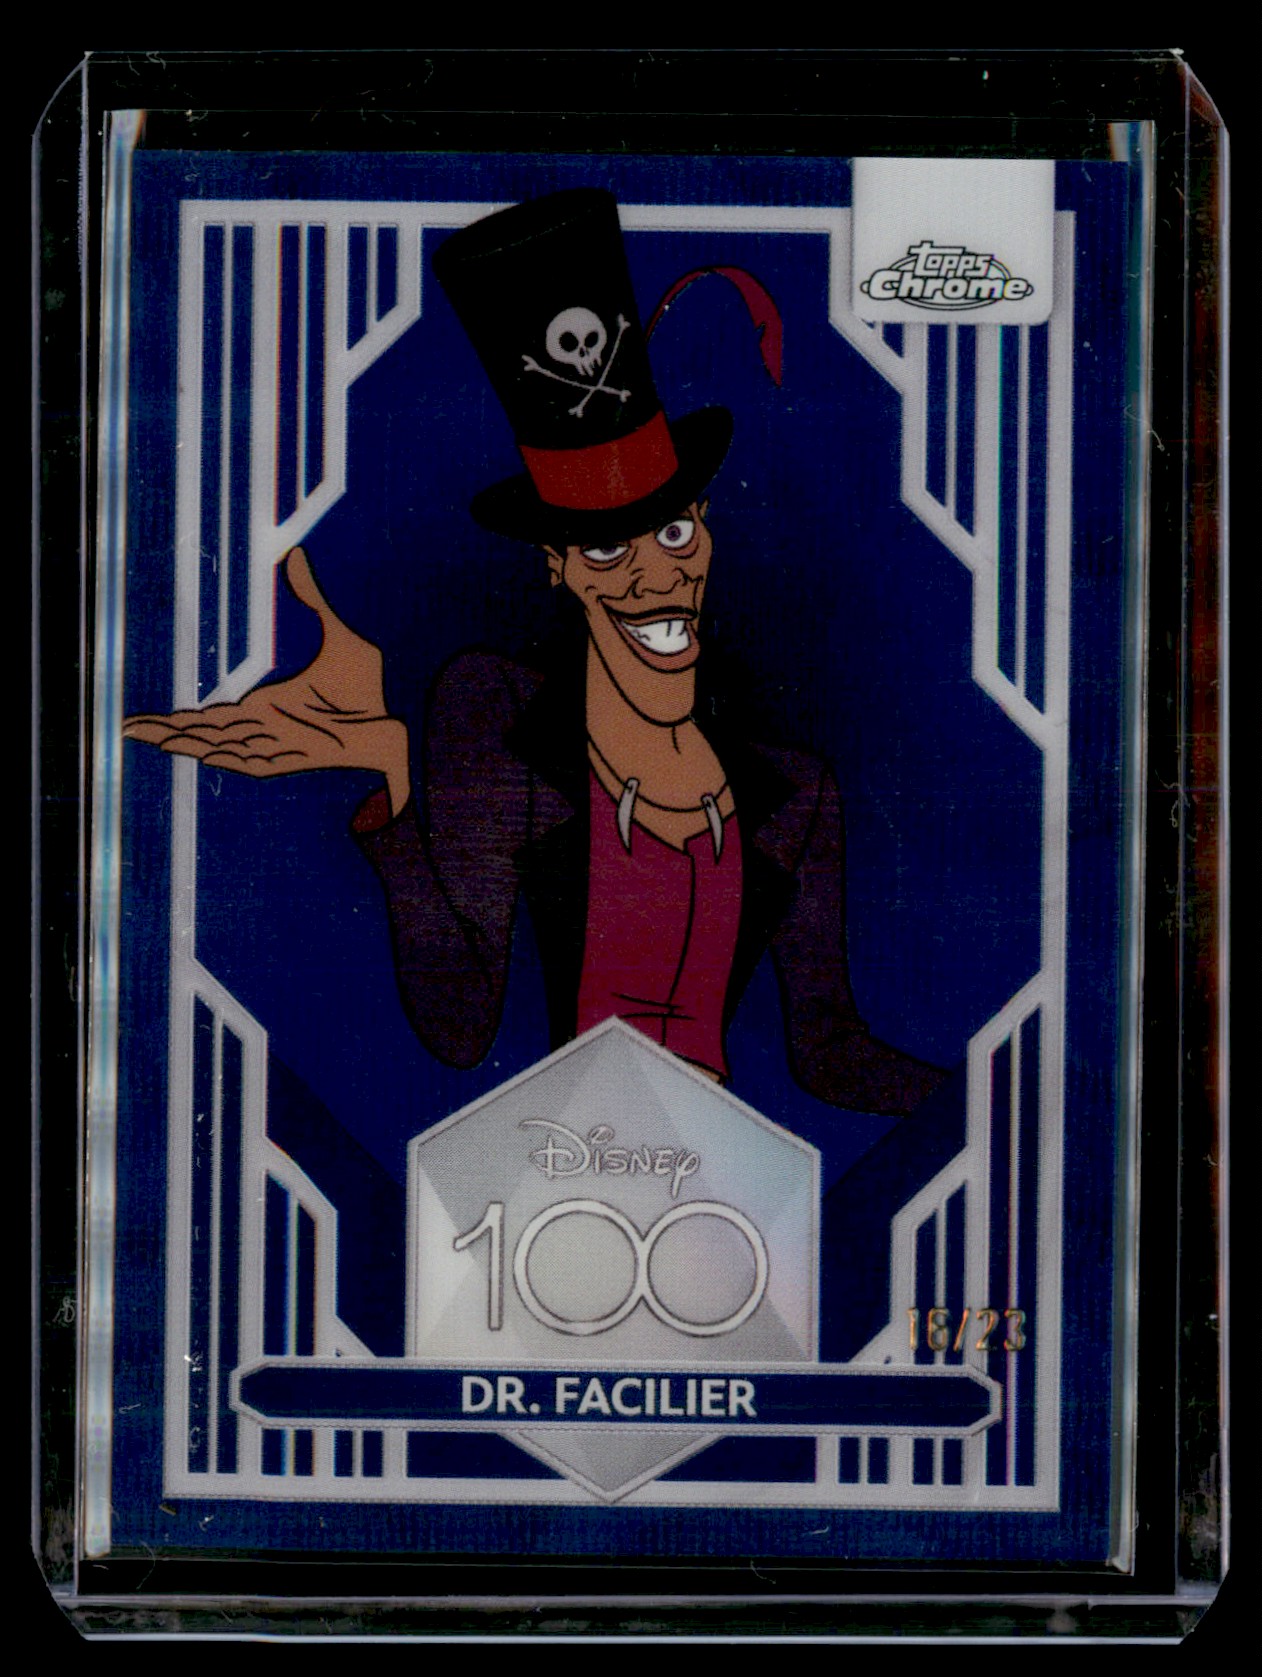 2023 topps disney chrome 100 dr. facilier blue wave #70 card front image